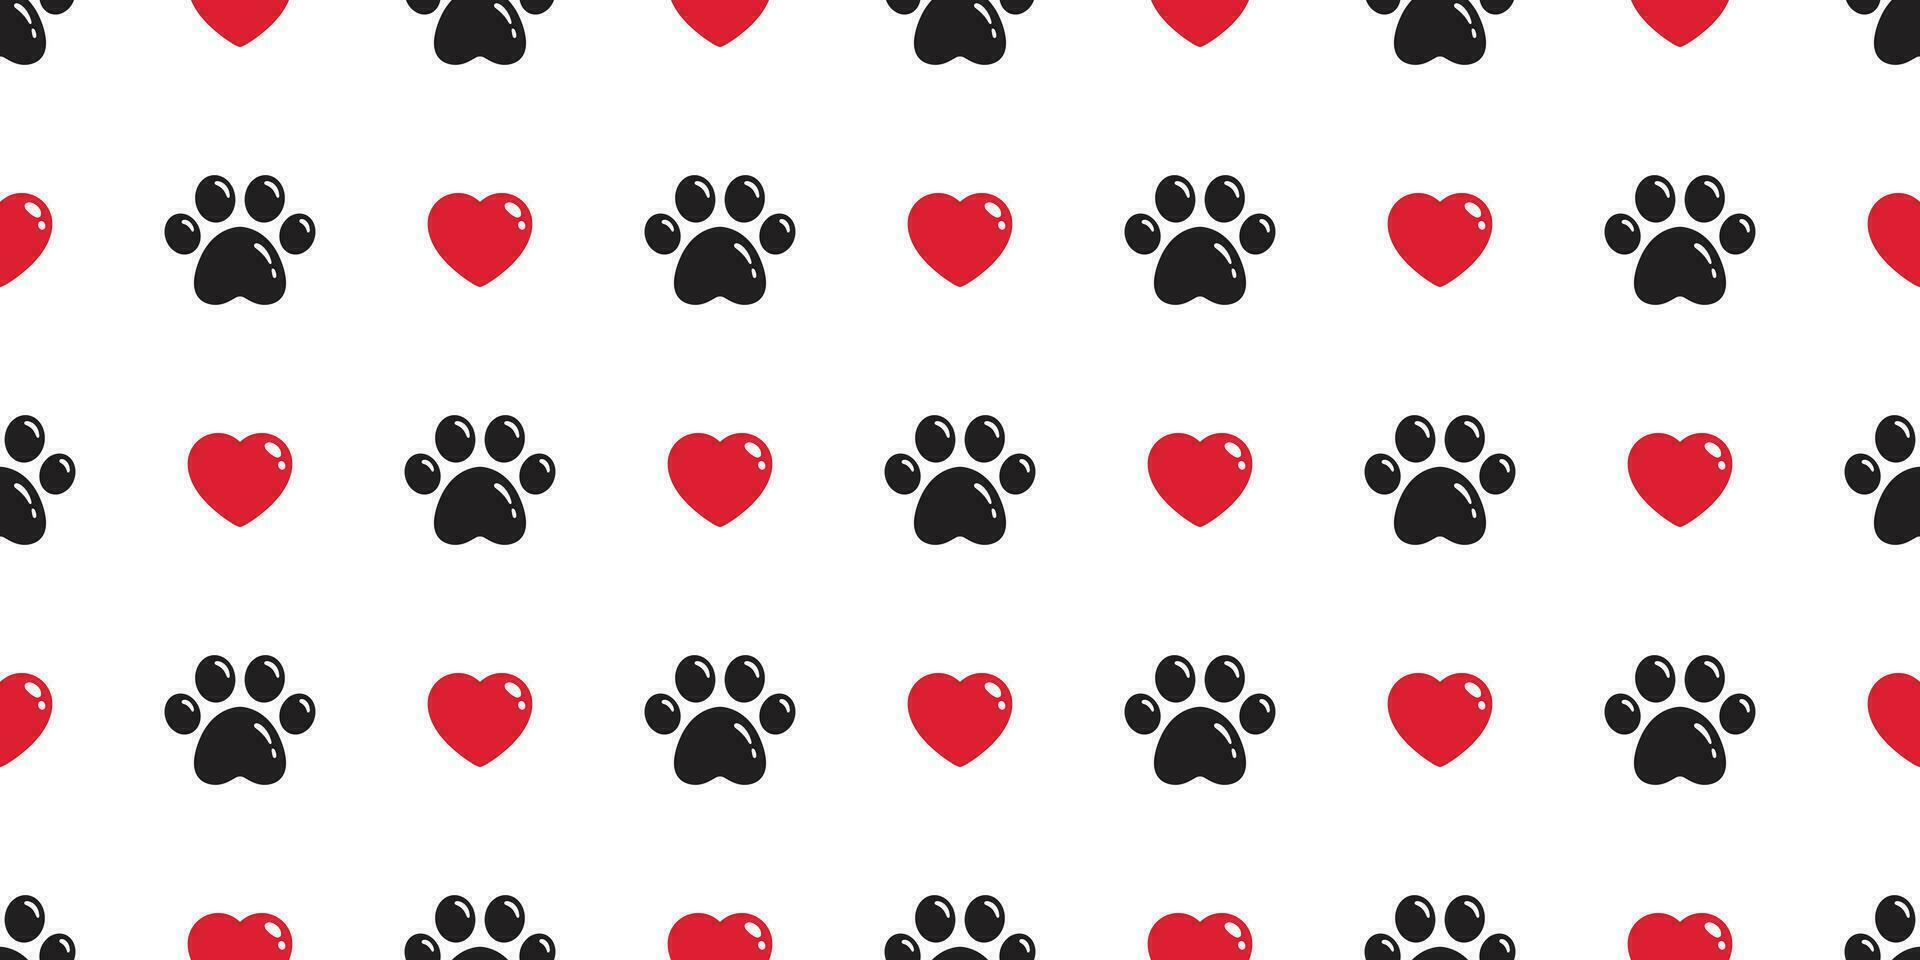 Dog Paw seamless pattern vector heart valentine french bulldog footprint cartoon tile background repeat wallpaper scarf isolated illustration